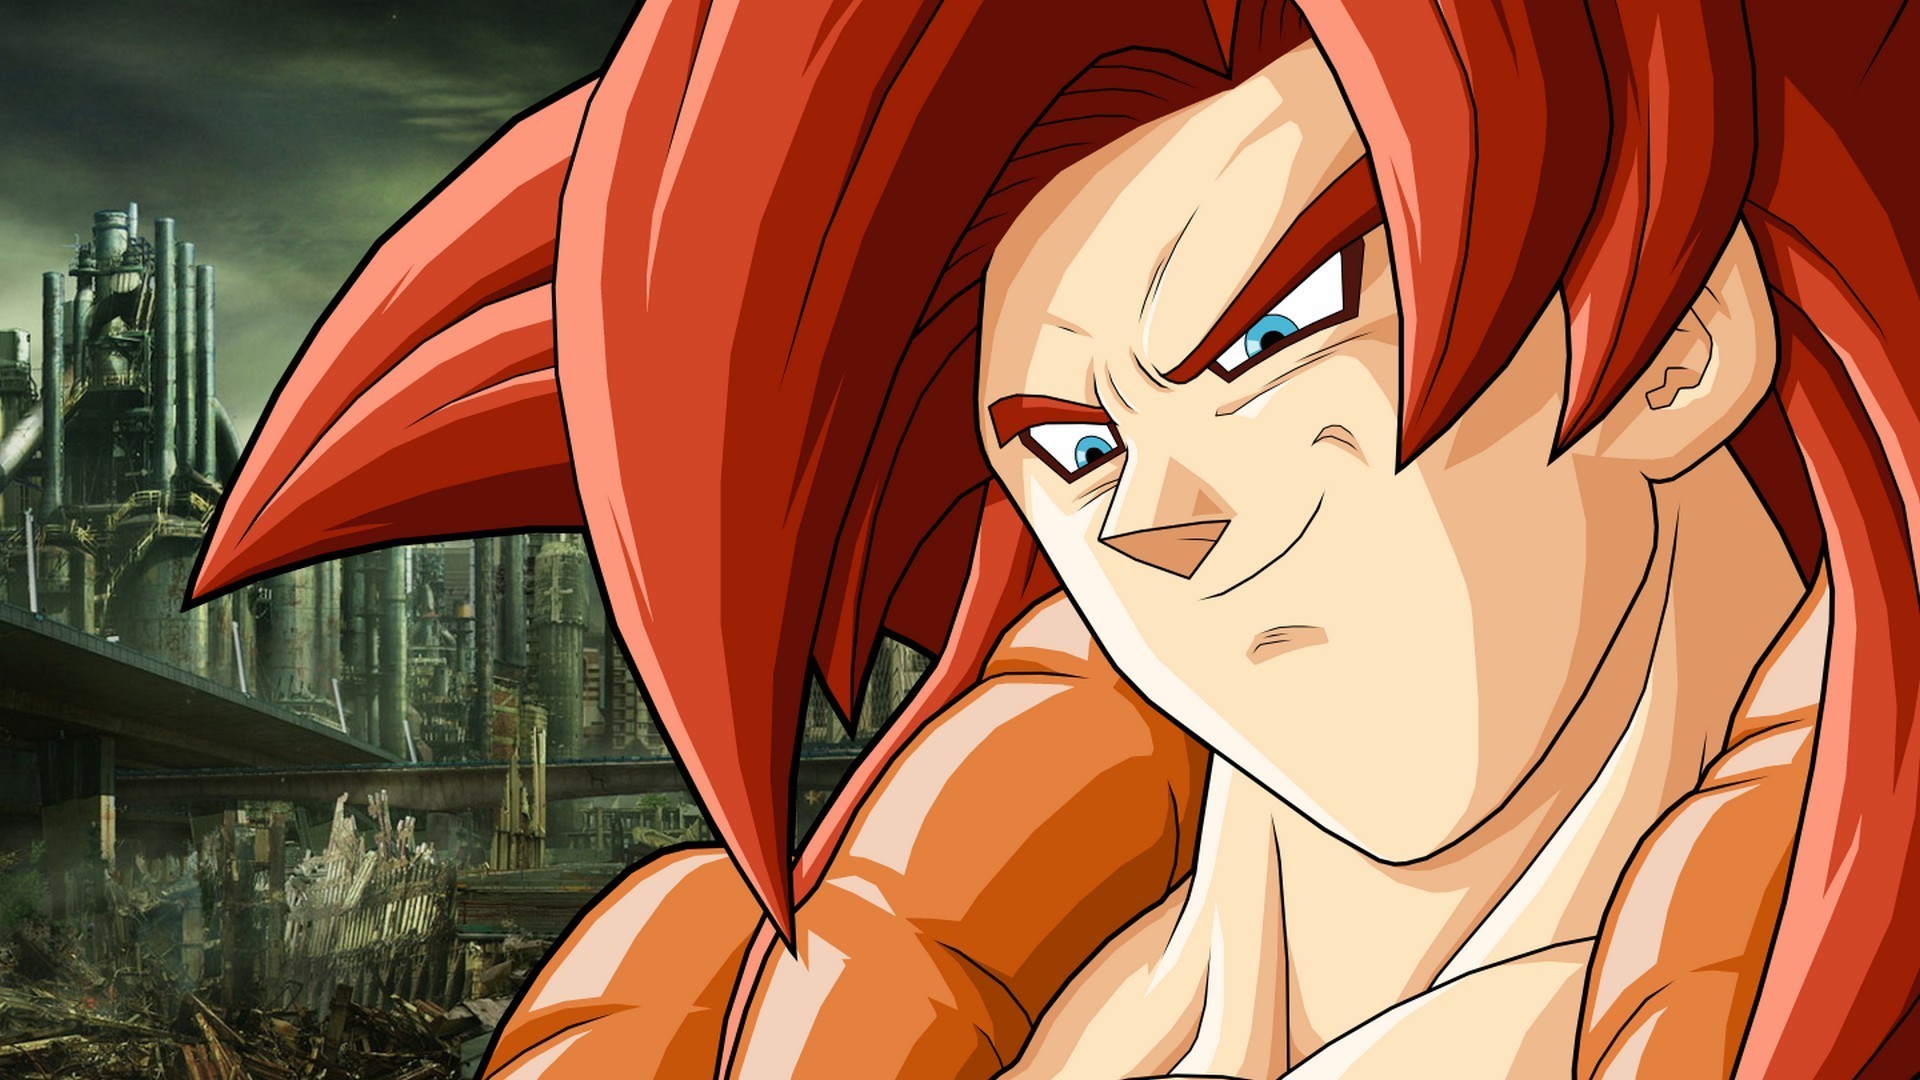 Wallpaper Goku SSJ4 HD with image resolution 1920x1080 pixel. You can make this wallpaper for your Desktop Computer Backgrounds, Mac Wallpapers, Android Lock screen or iPhone Screensavers